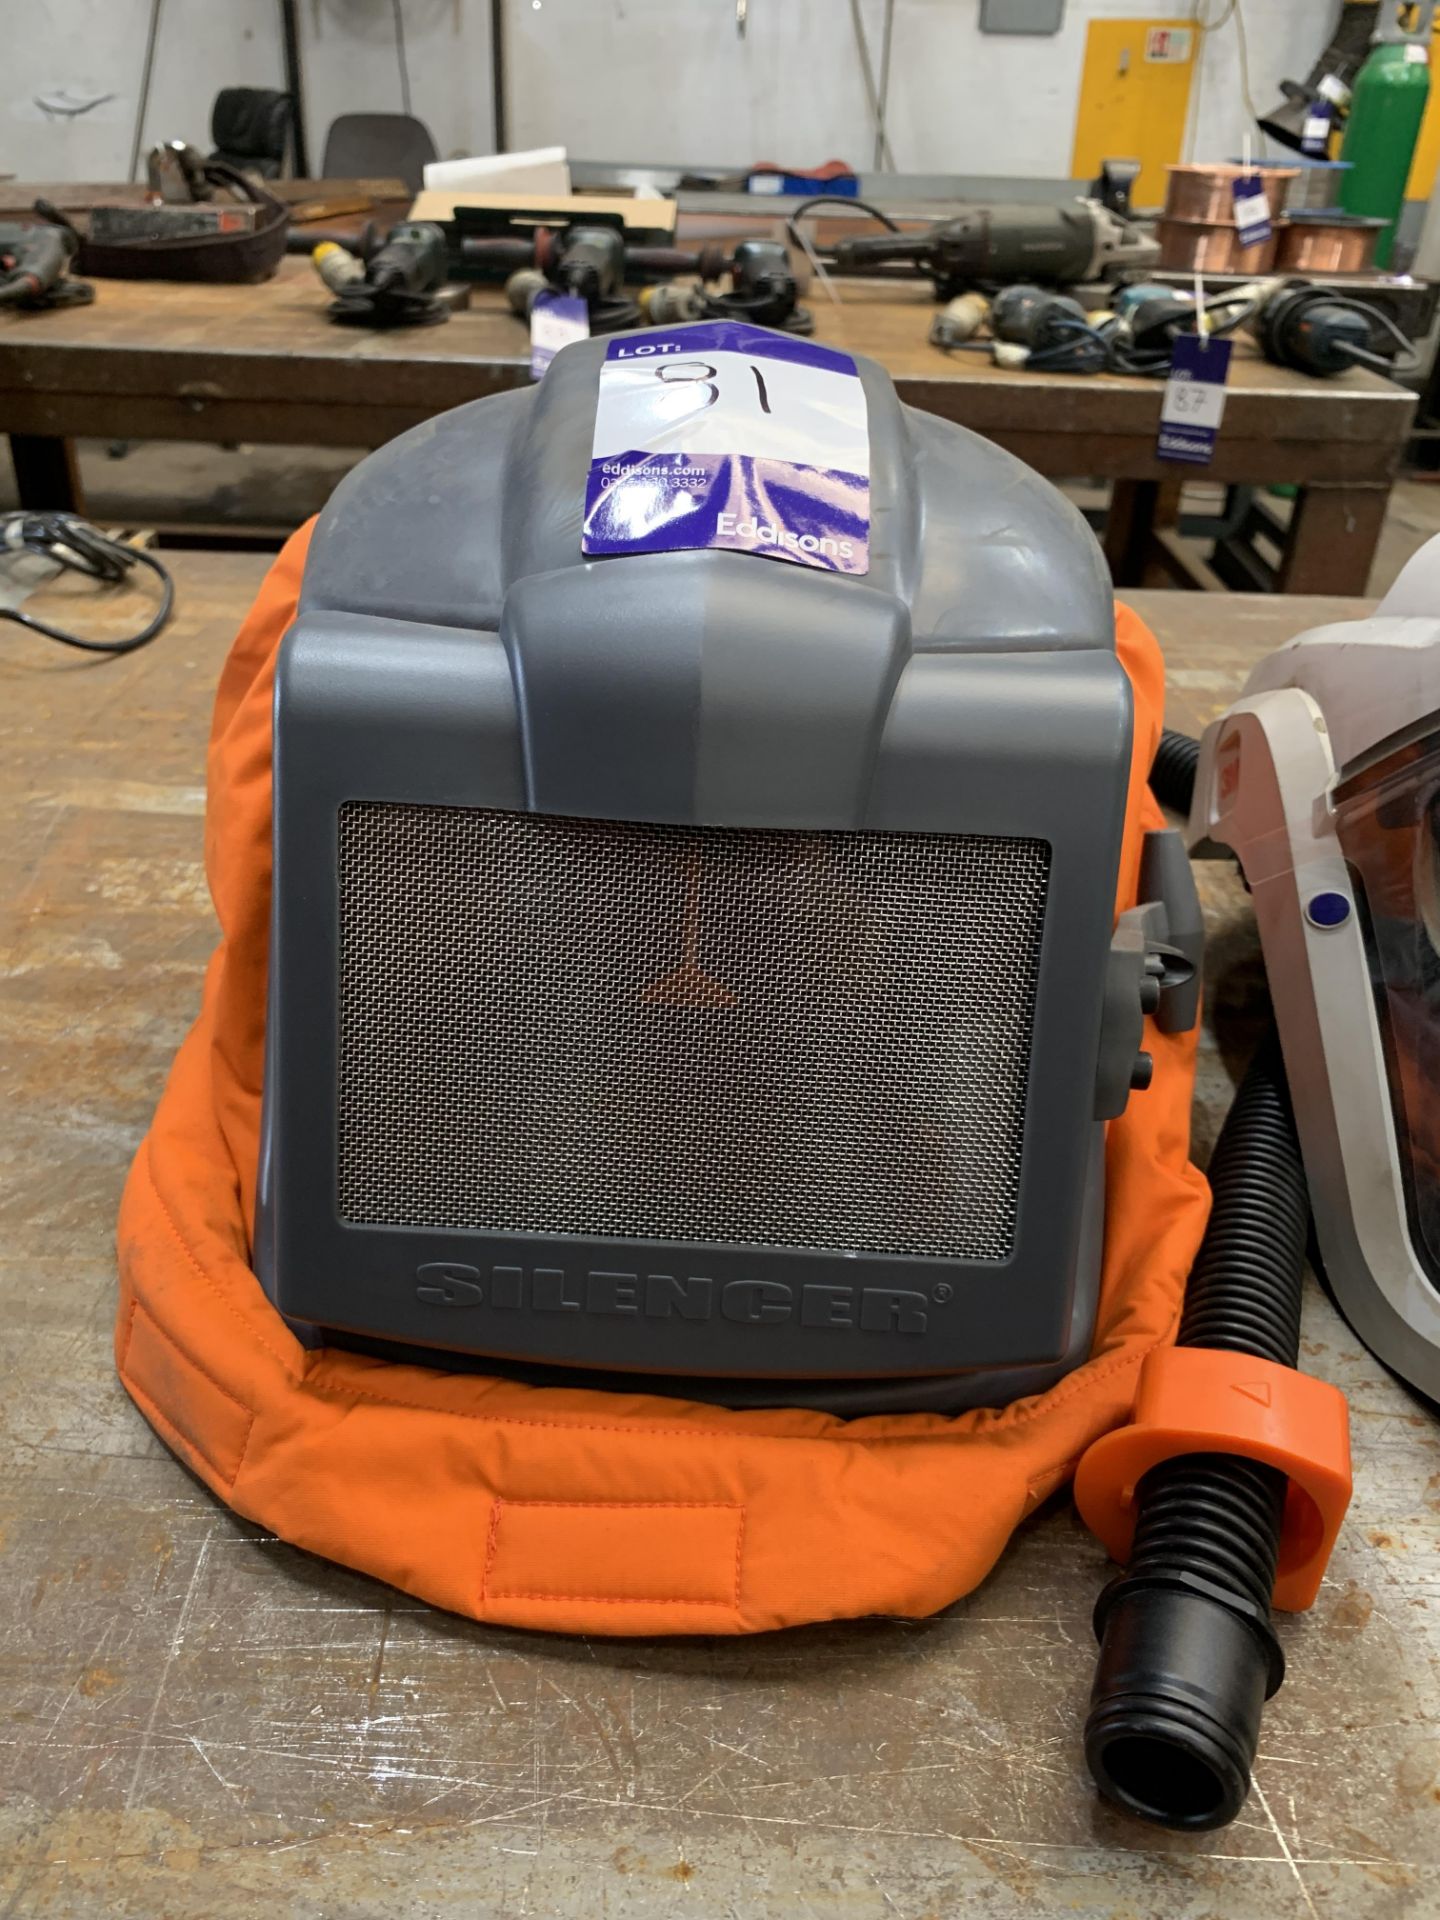 Silencer welding mask, with integrated ear defenders, and 3M welding mask - Image 2 of 3